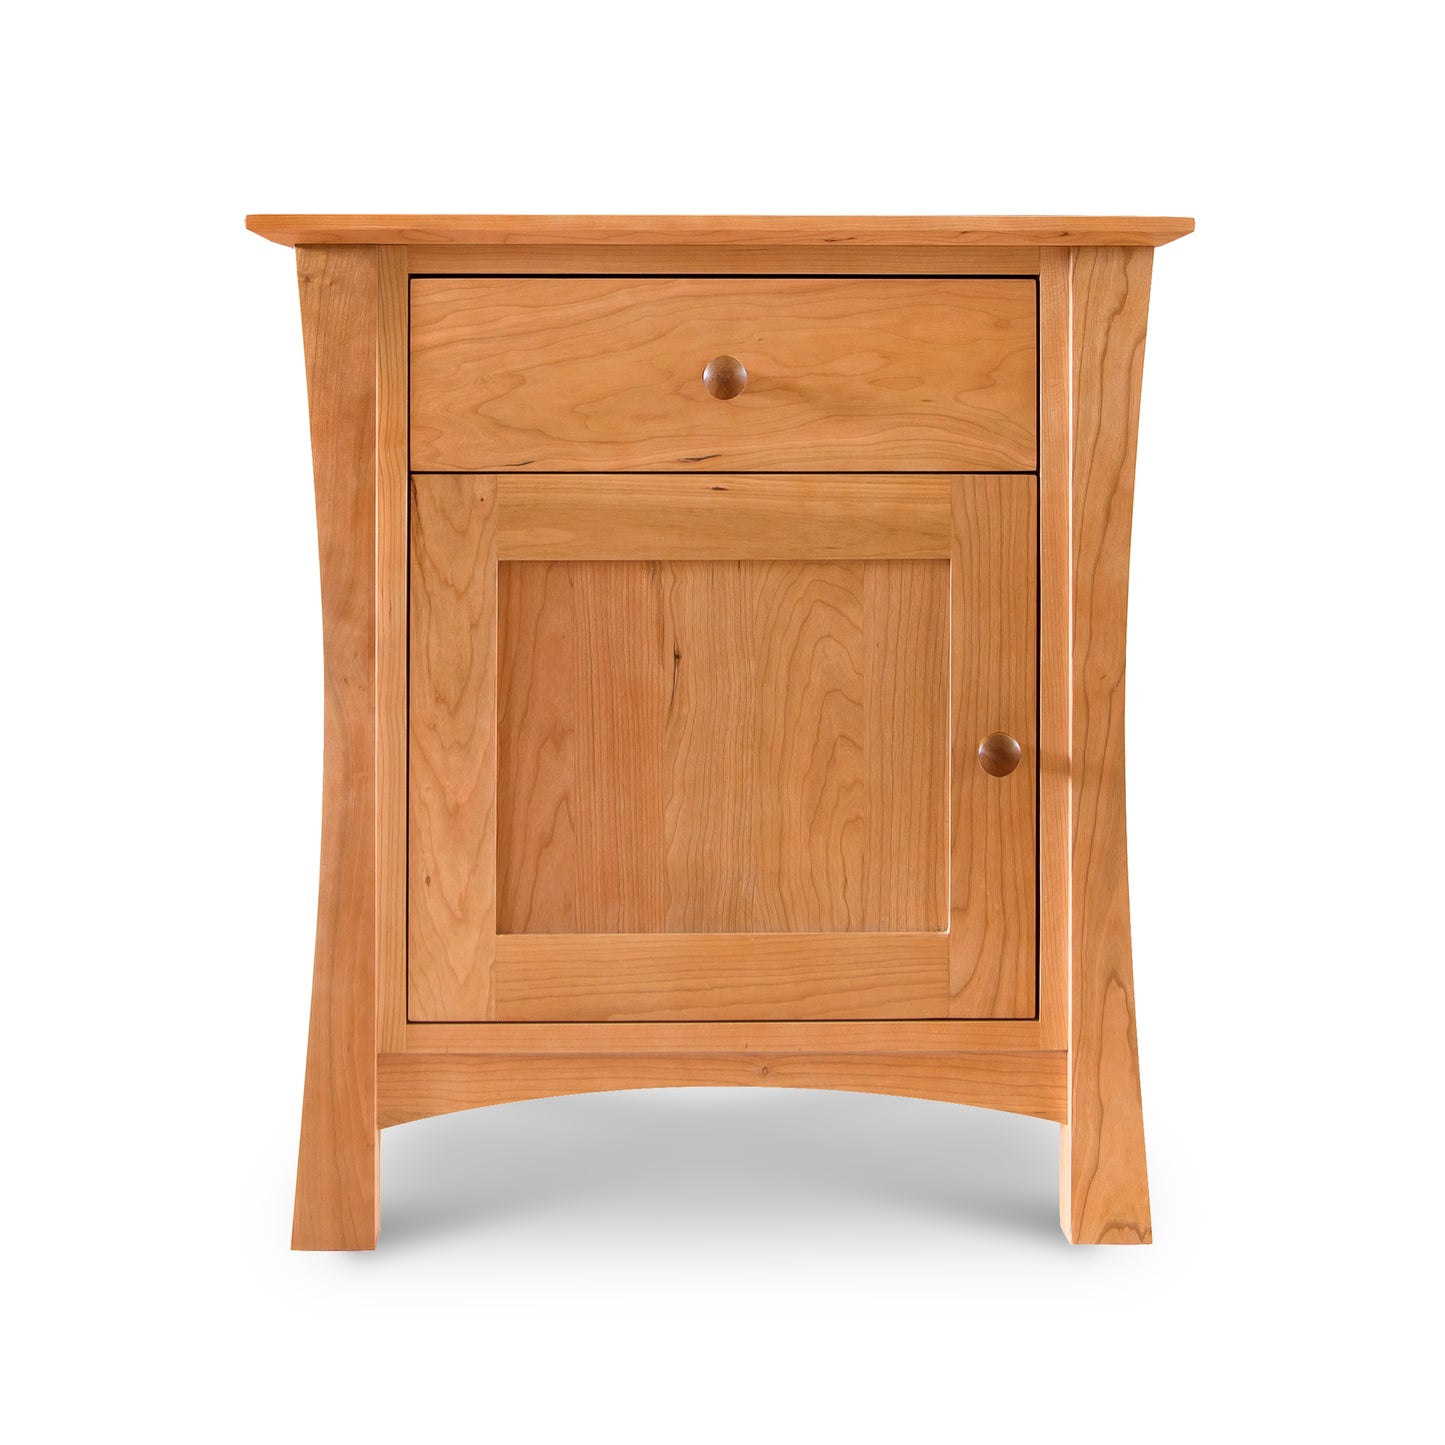 A Lyndon Furniture Andrews 1-Drawer Nightstand with Door, a luxury nightstand, handcrafted with a drawer and a door.